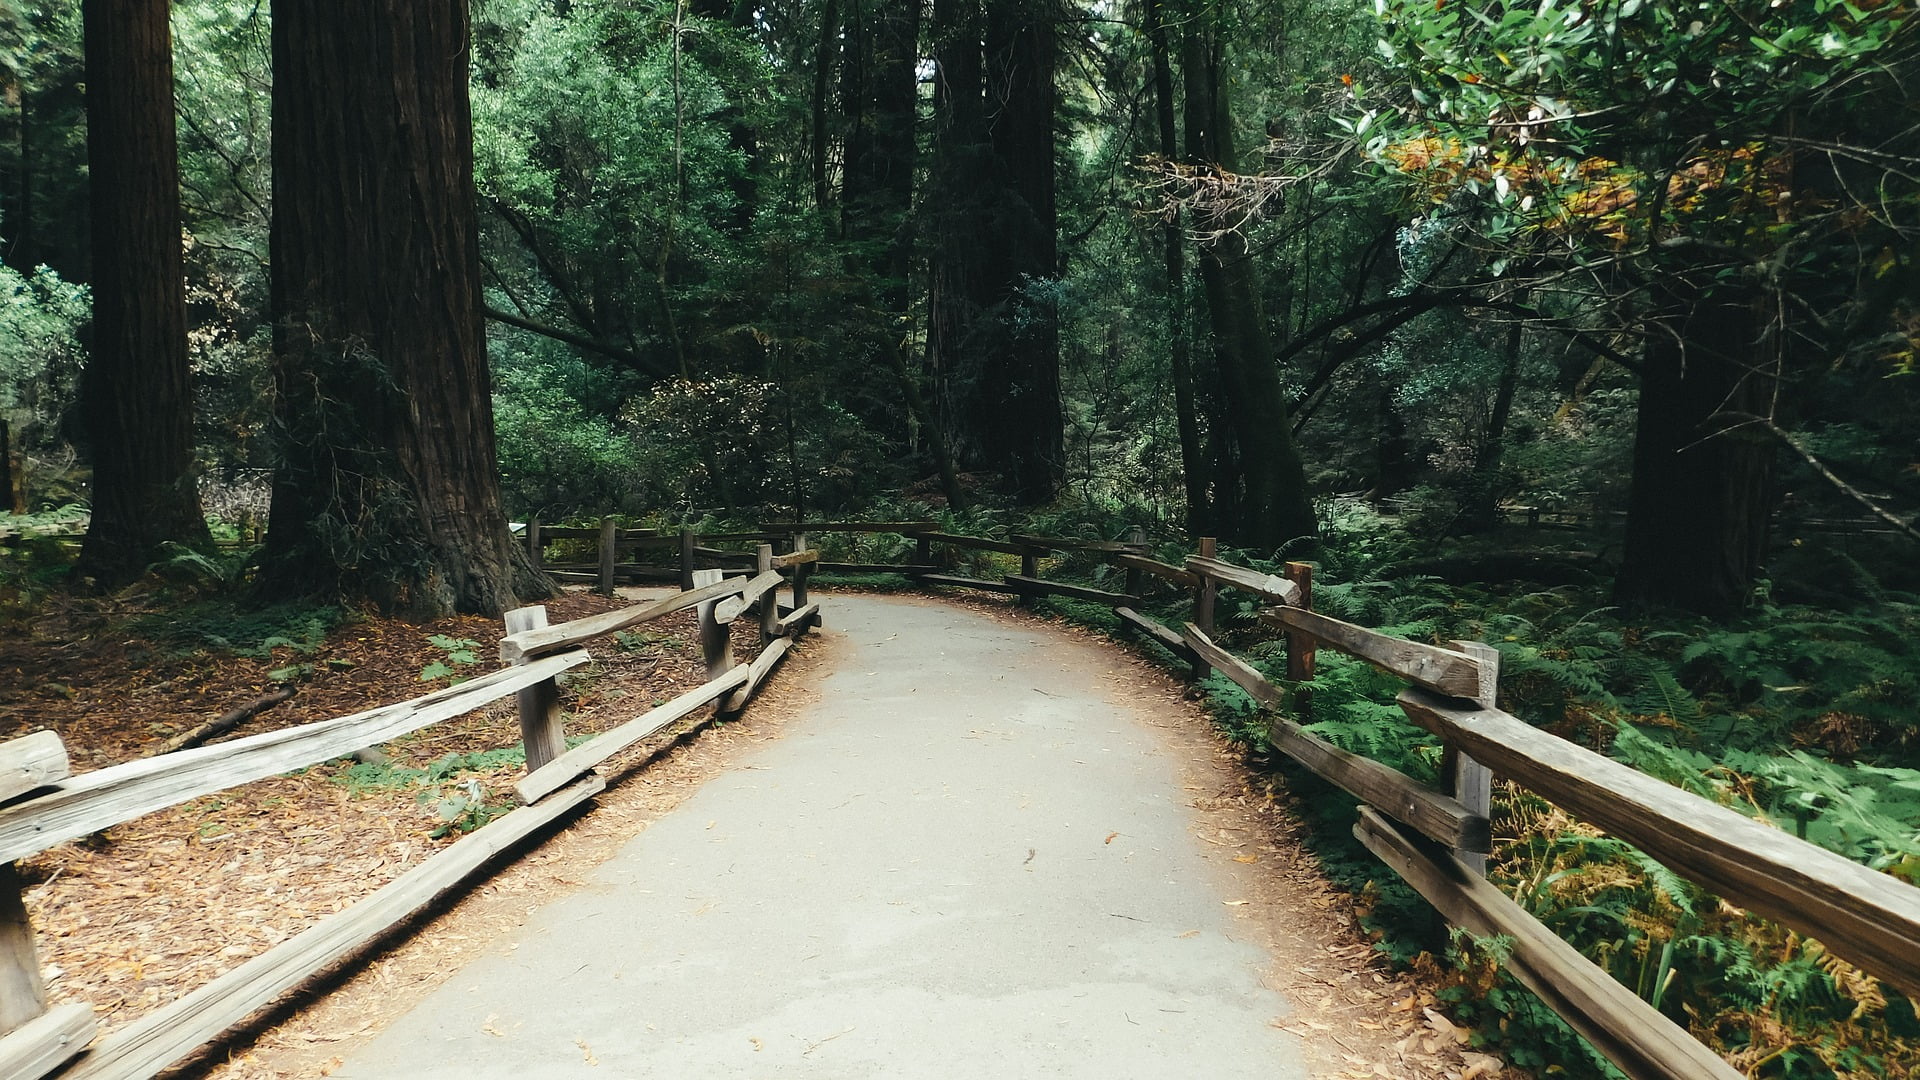 How To Spend A Perfect Day in Muir Woods